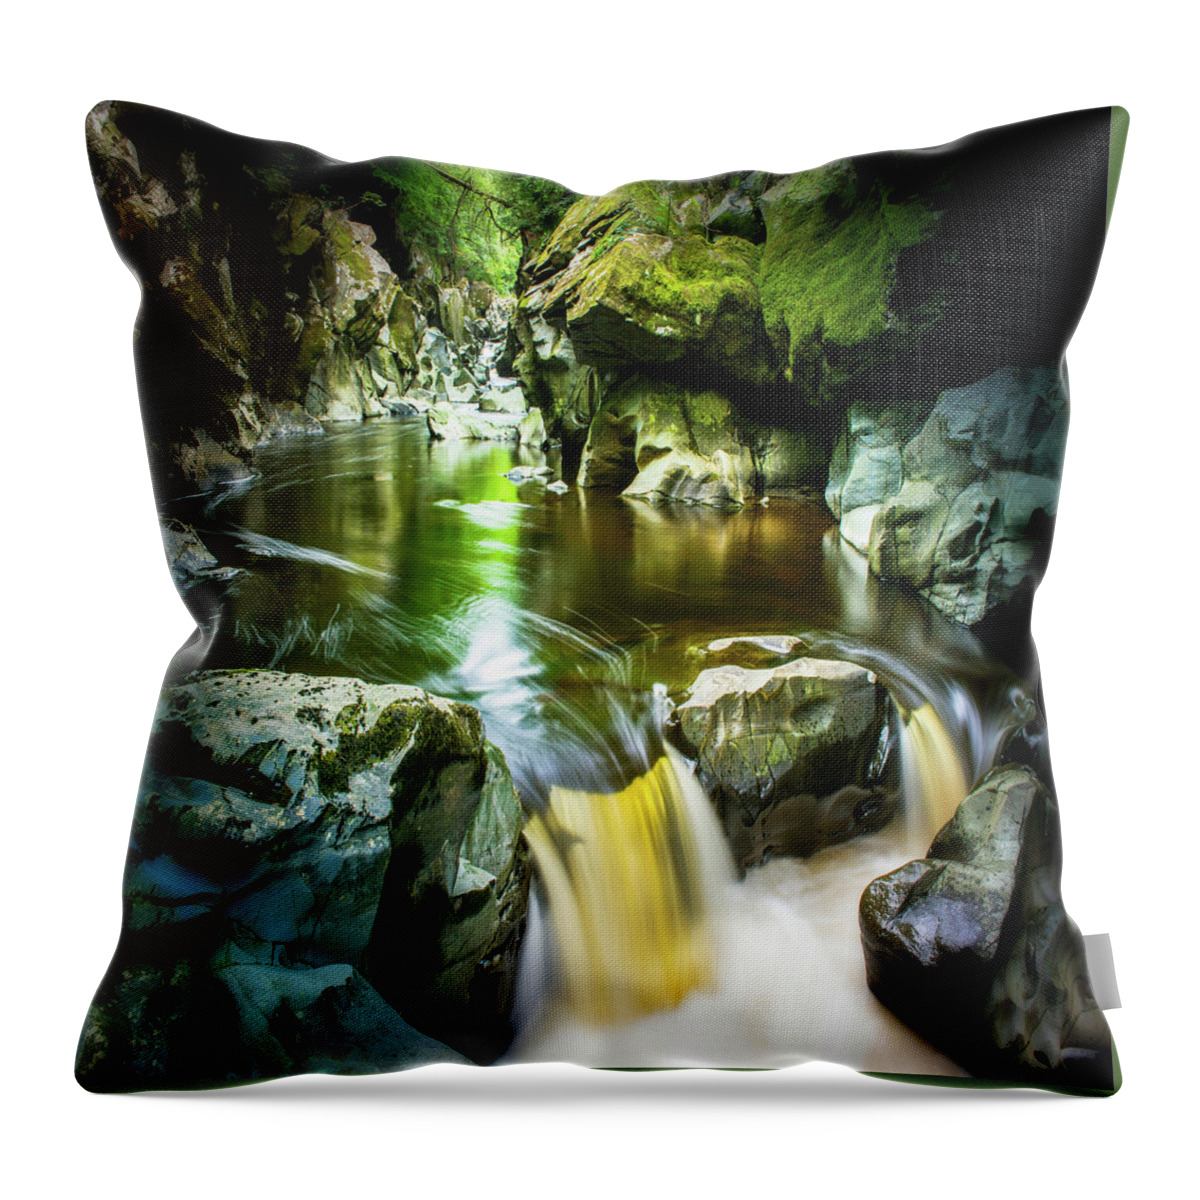 Wales Throw Pillow featuring the digital art Waterfalls by Remigiusz MARCZAK